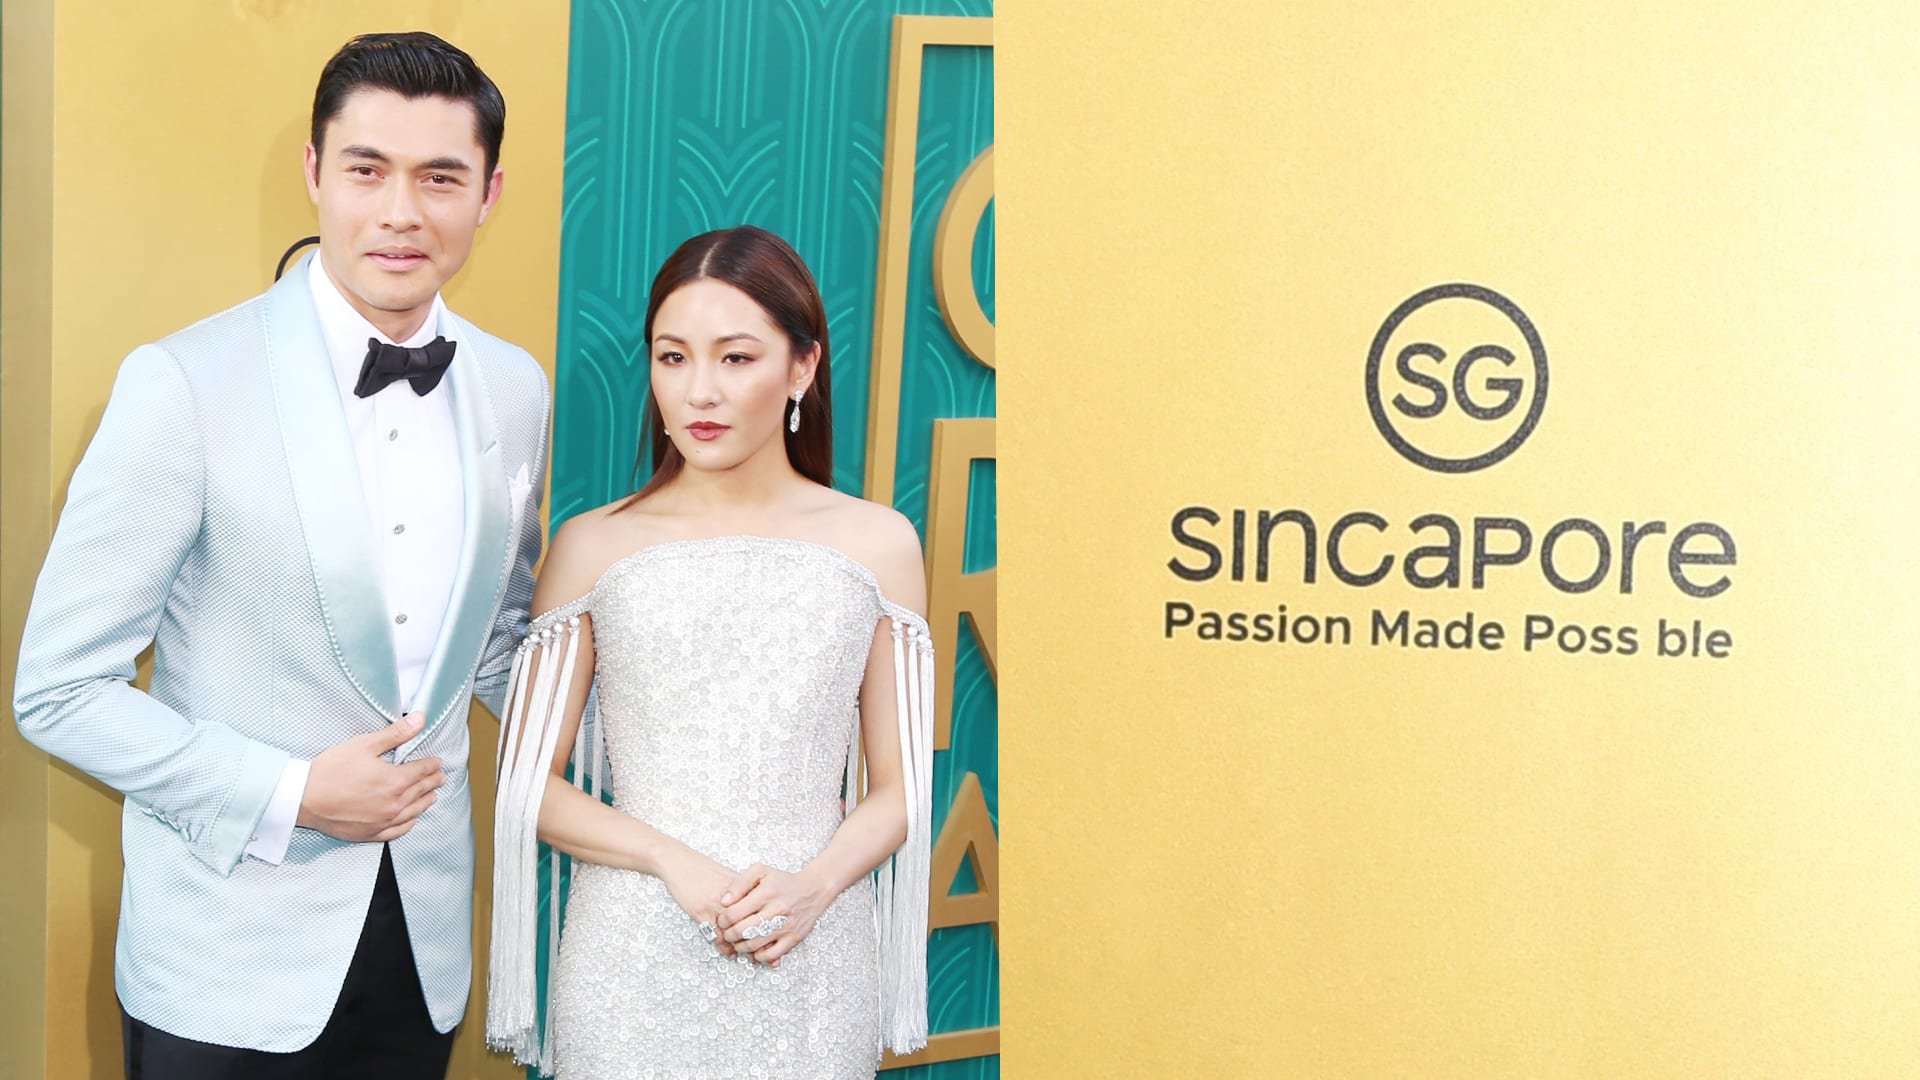 Why Are We Sincapore At The Crazy Rich Asians World Premiere?